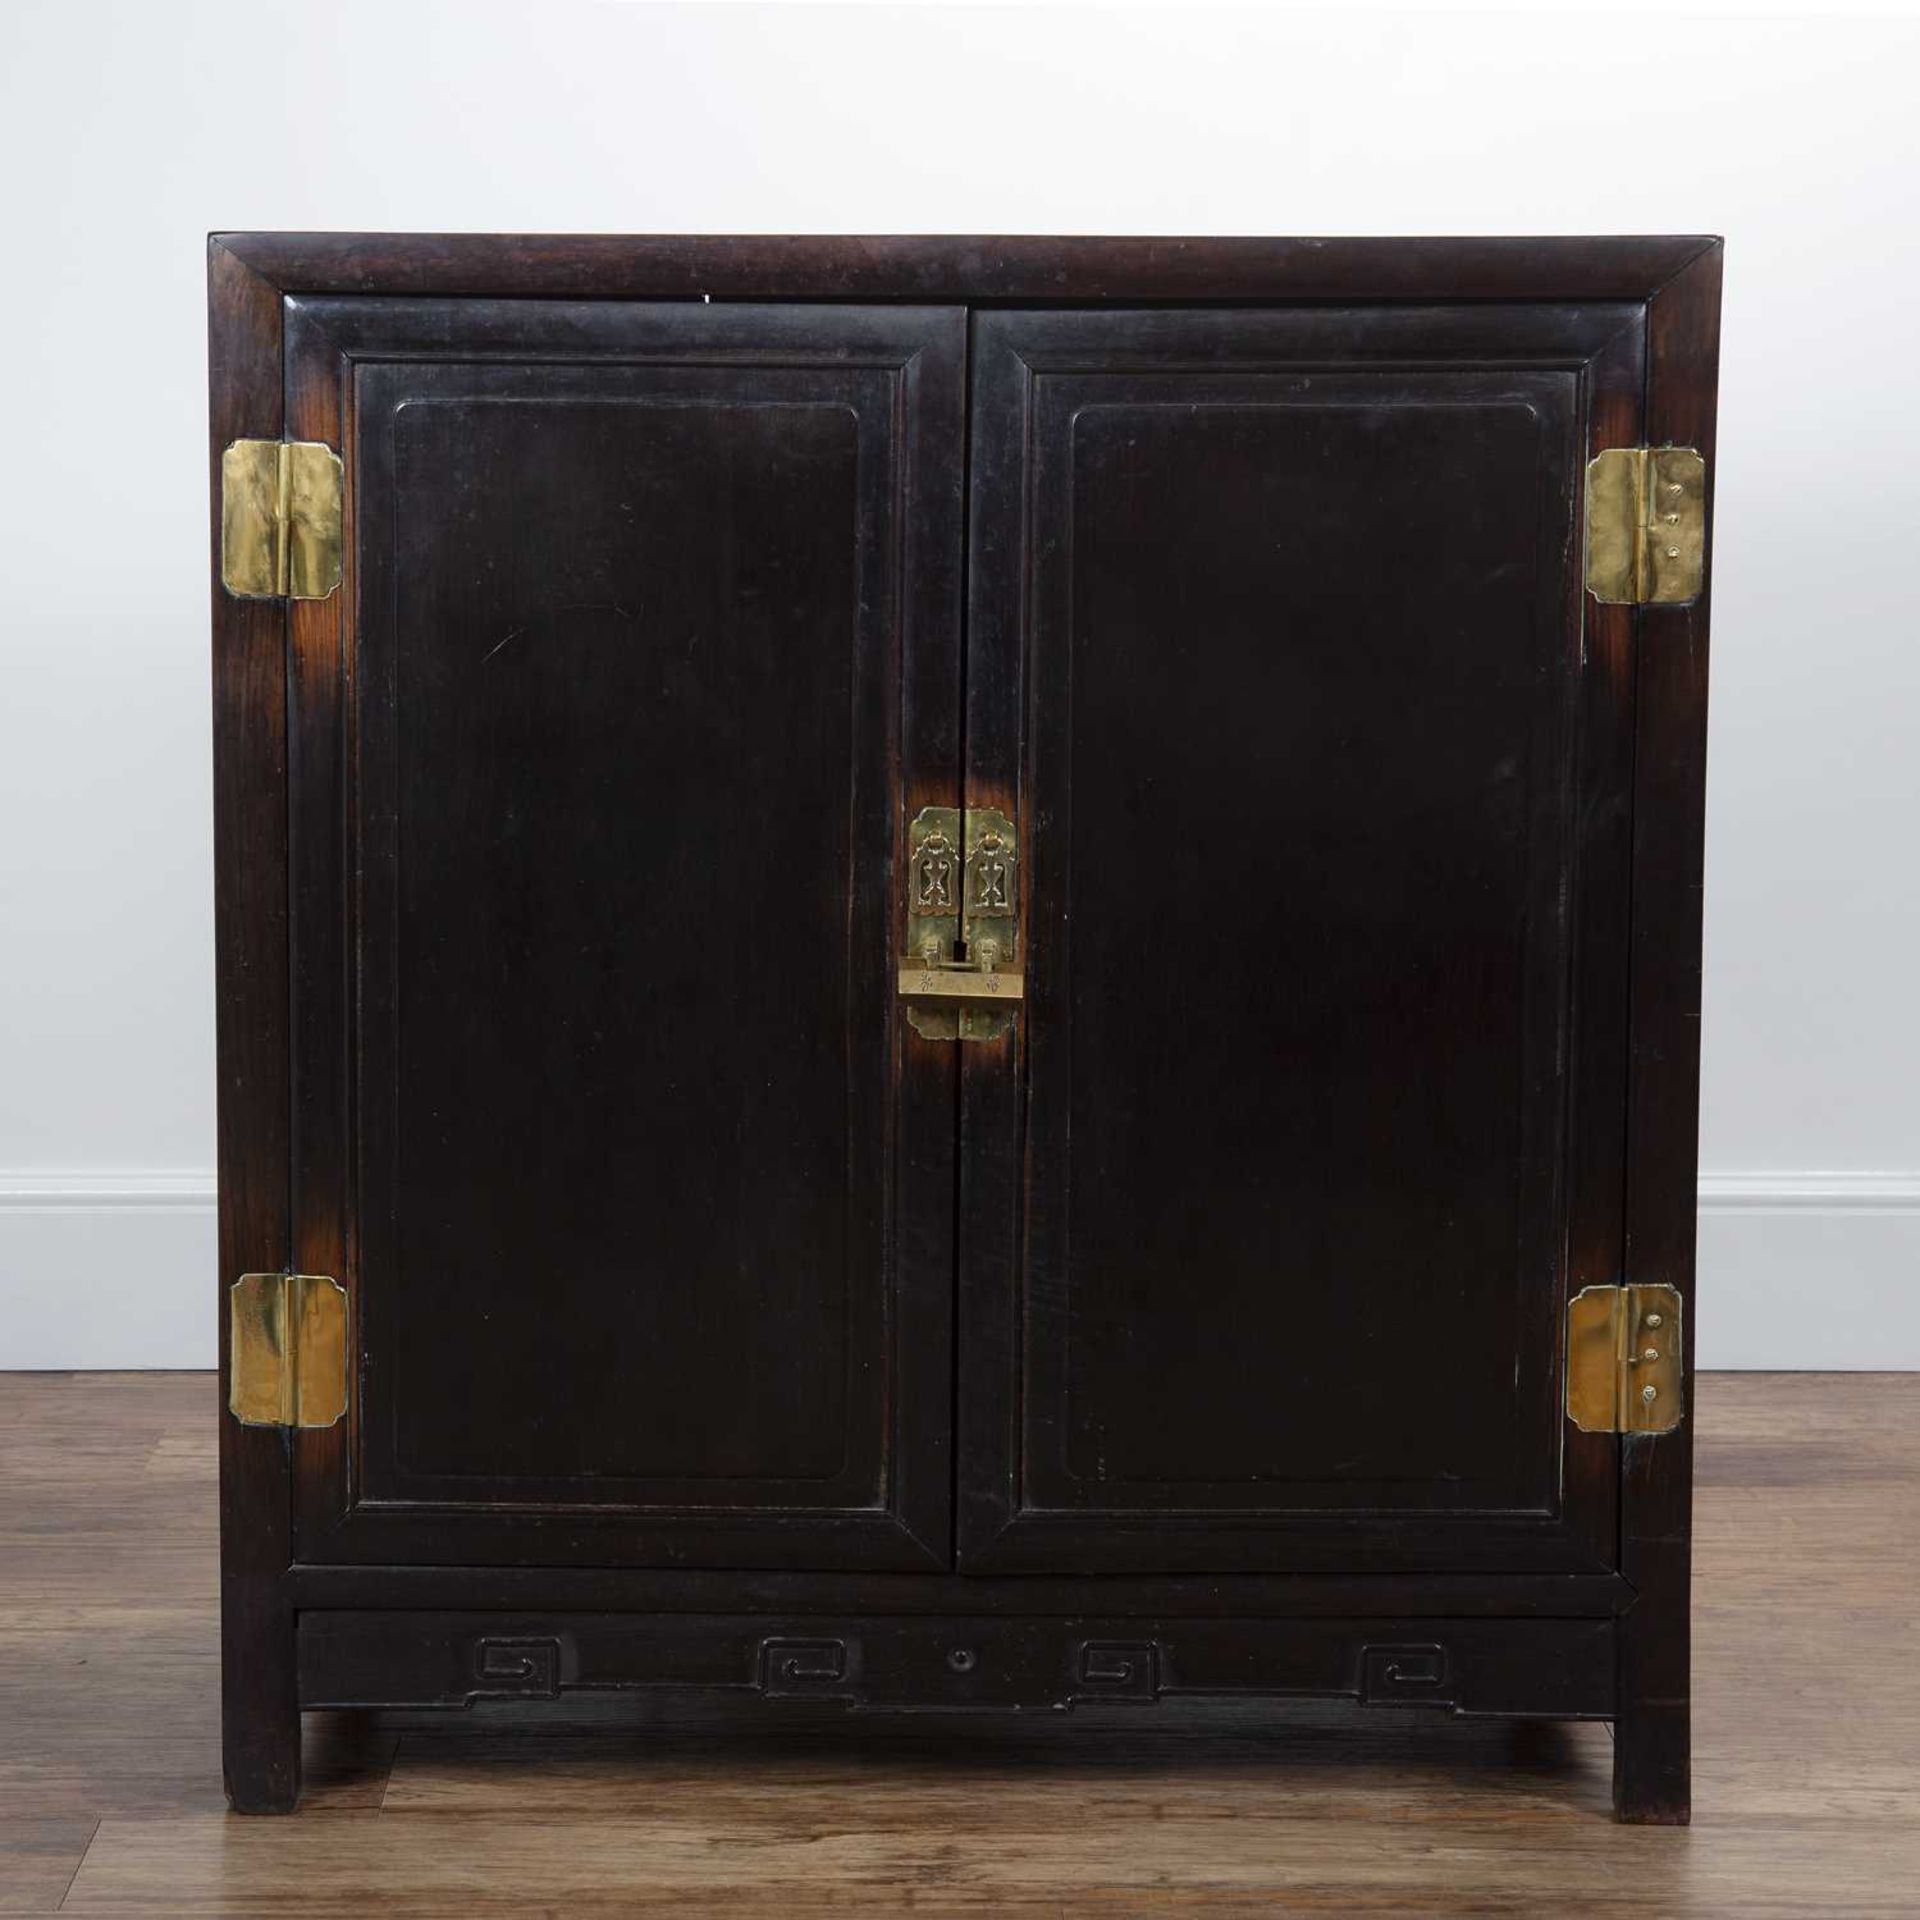 Zitan wood cabinet Chinese, 19th Century, with plain panel doors and with brass locks, 90cm wide x